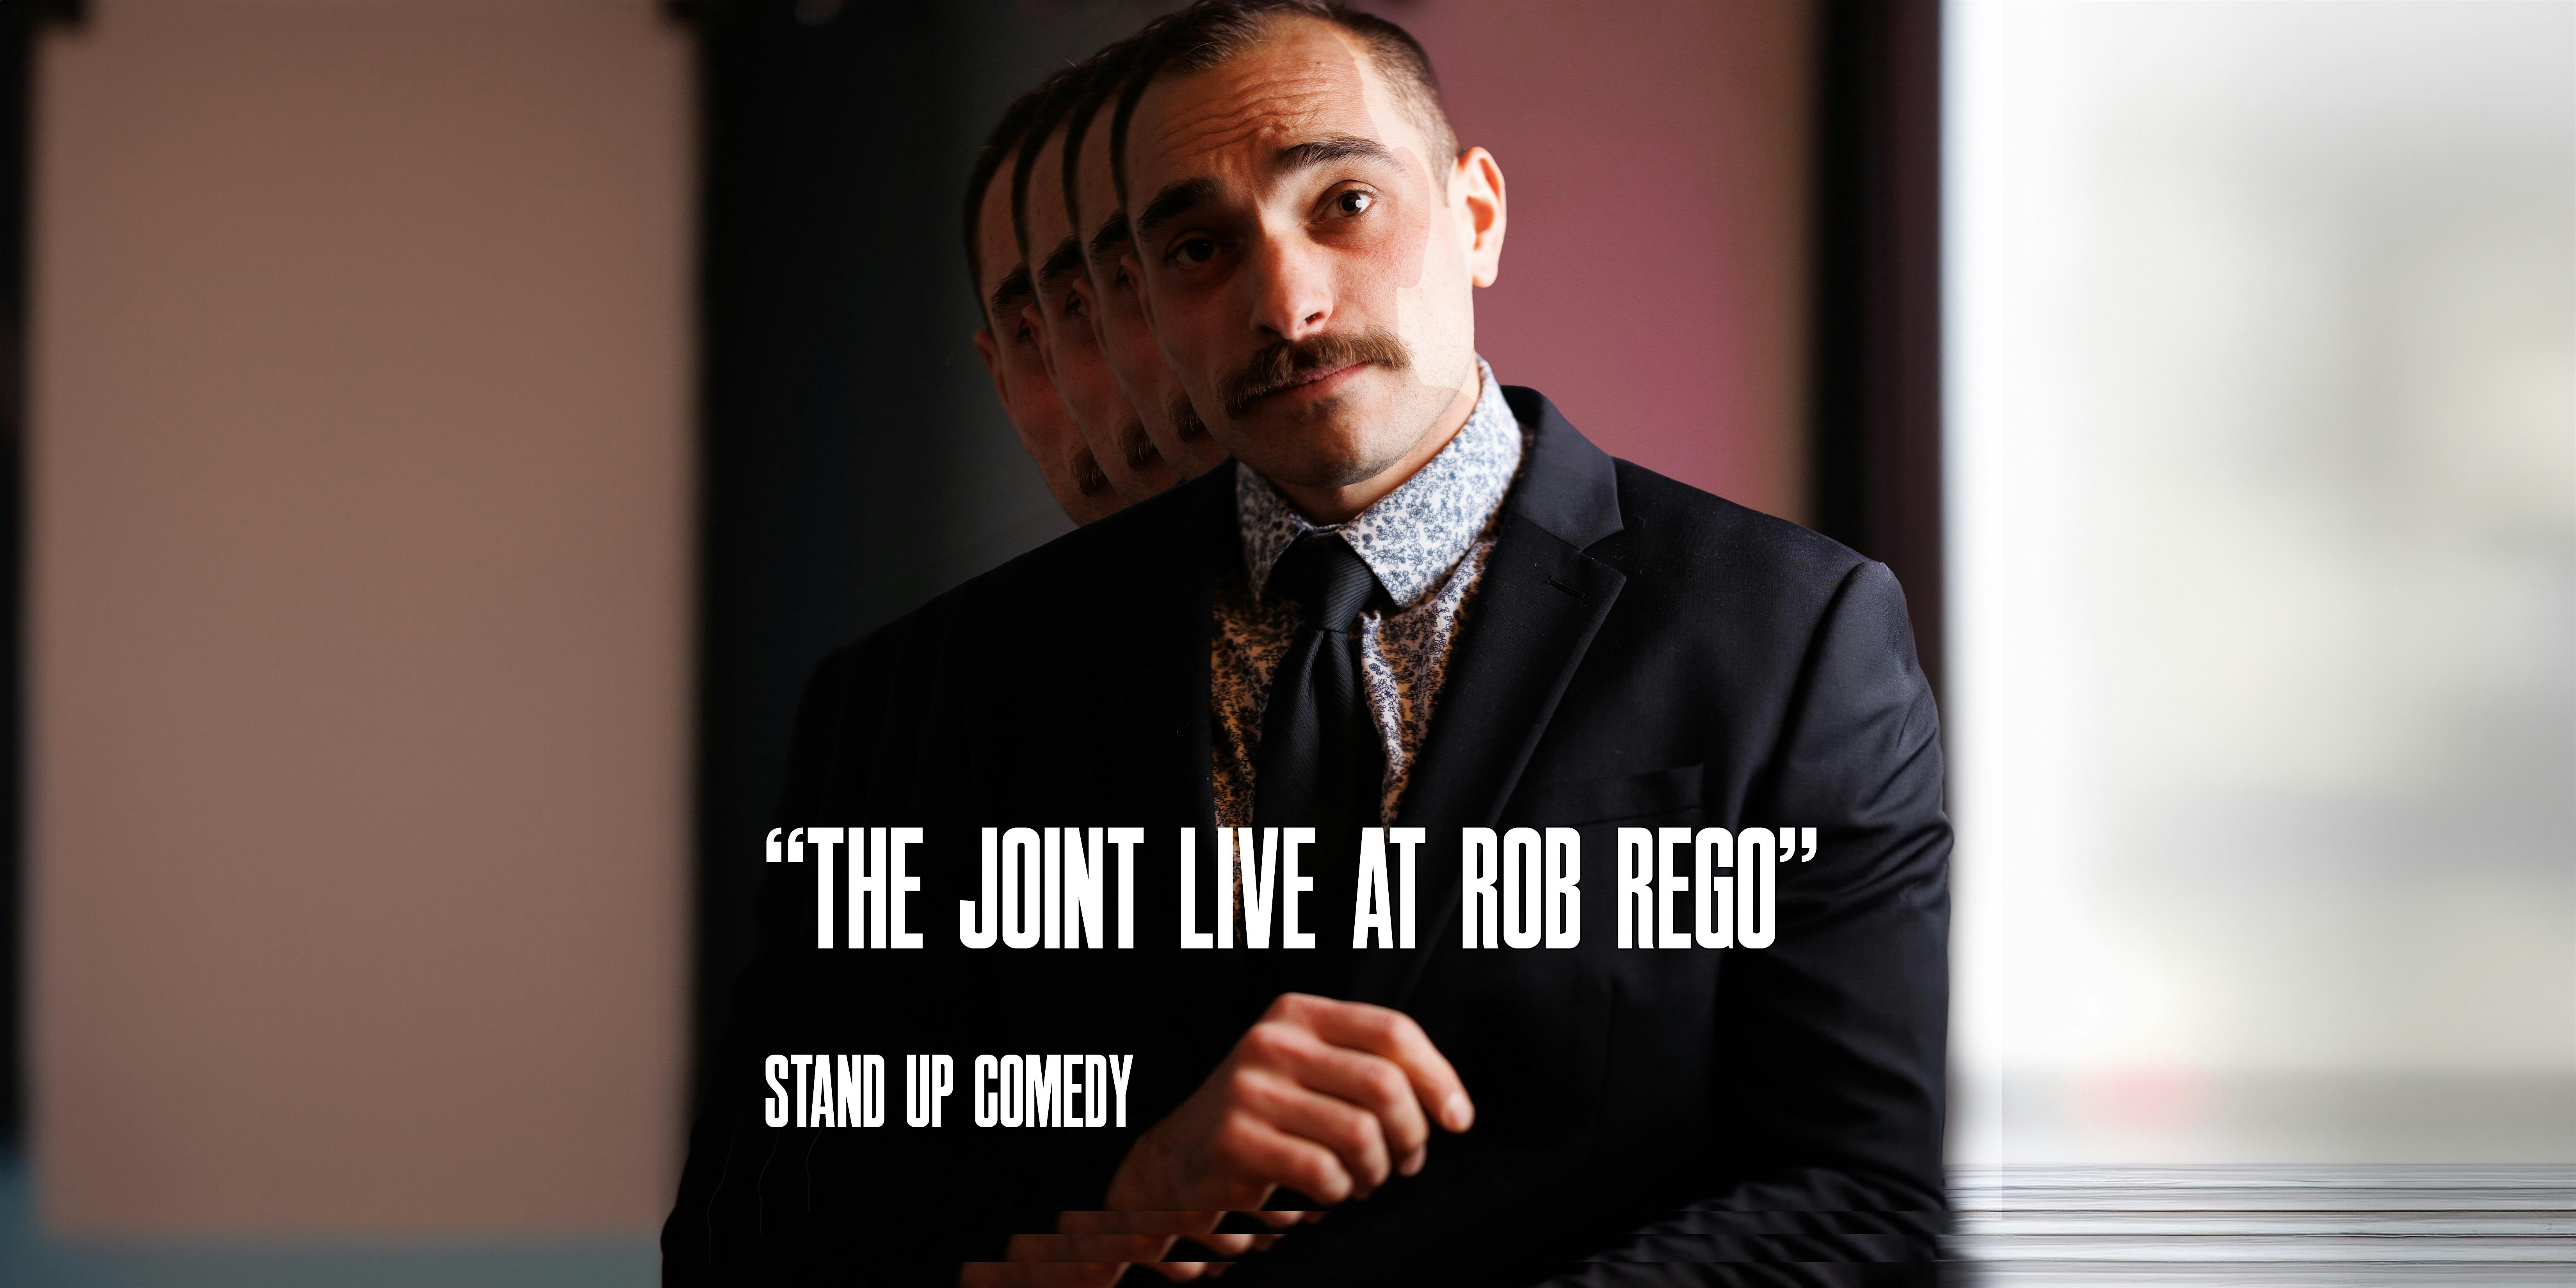 NYC Comedian Rob Rego at the Joint Comedy Club (One Night Only)